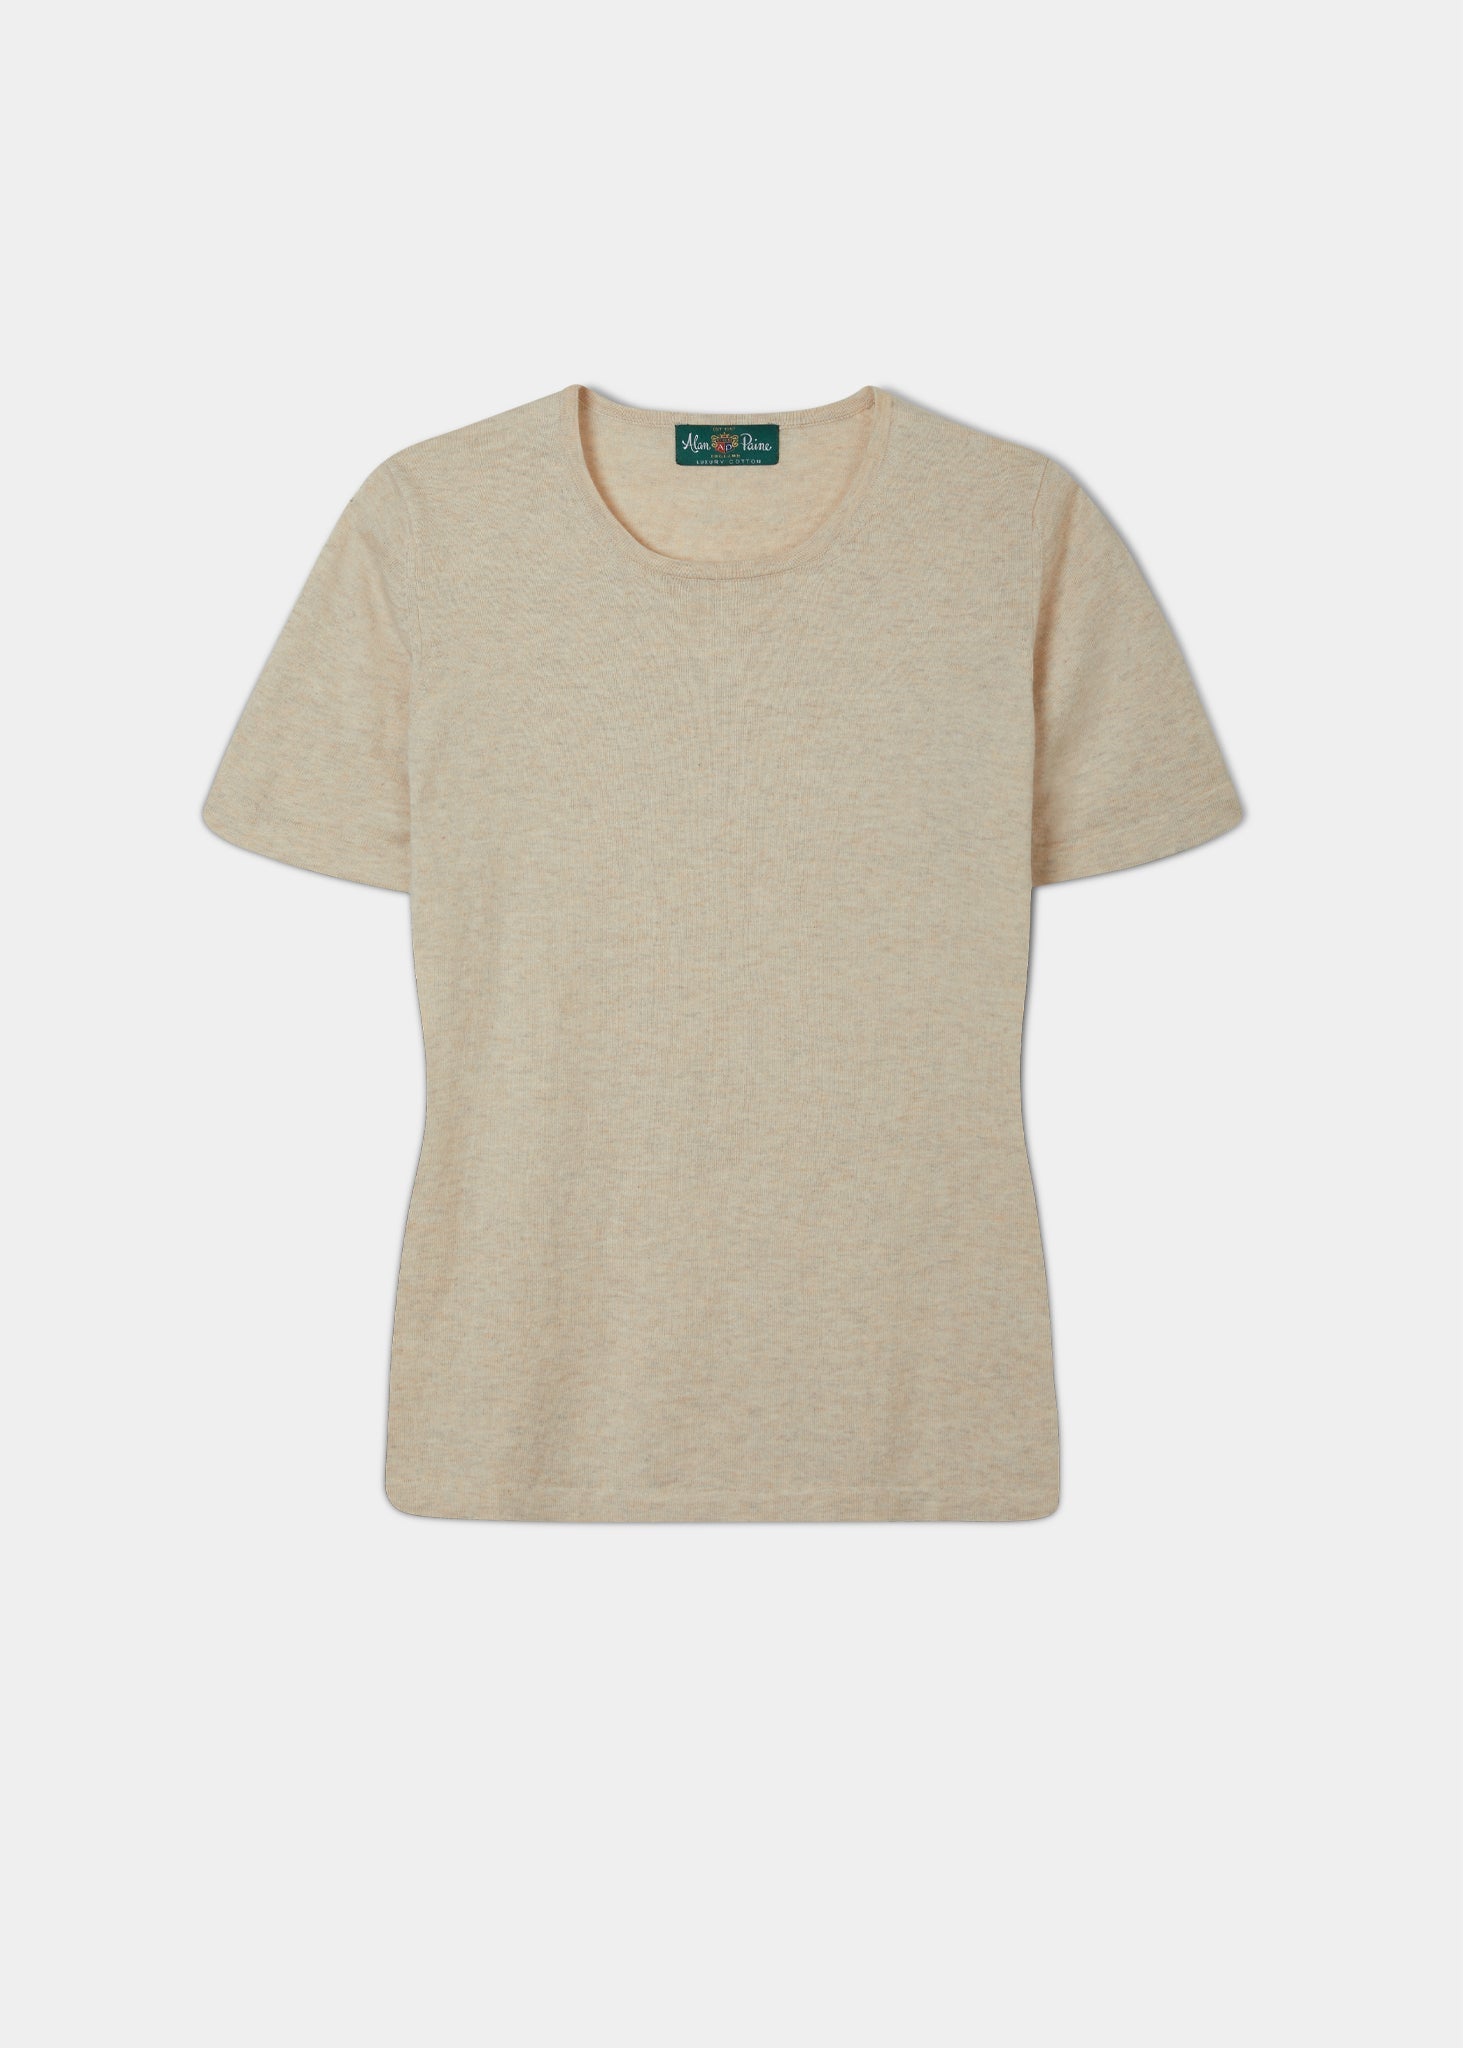 Ladies cotton cashmere short sleeved t-shirt in colourway carnation